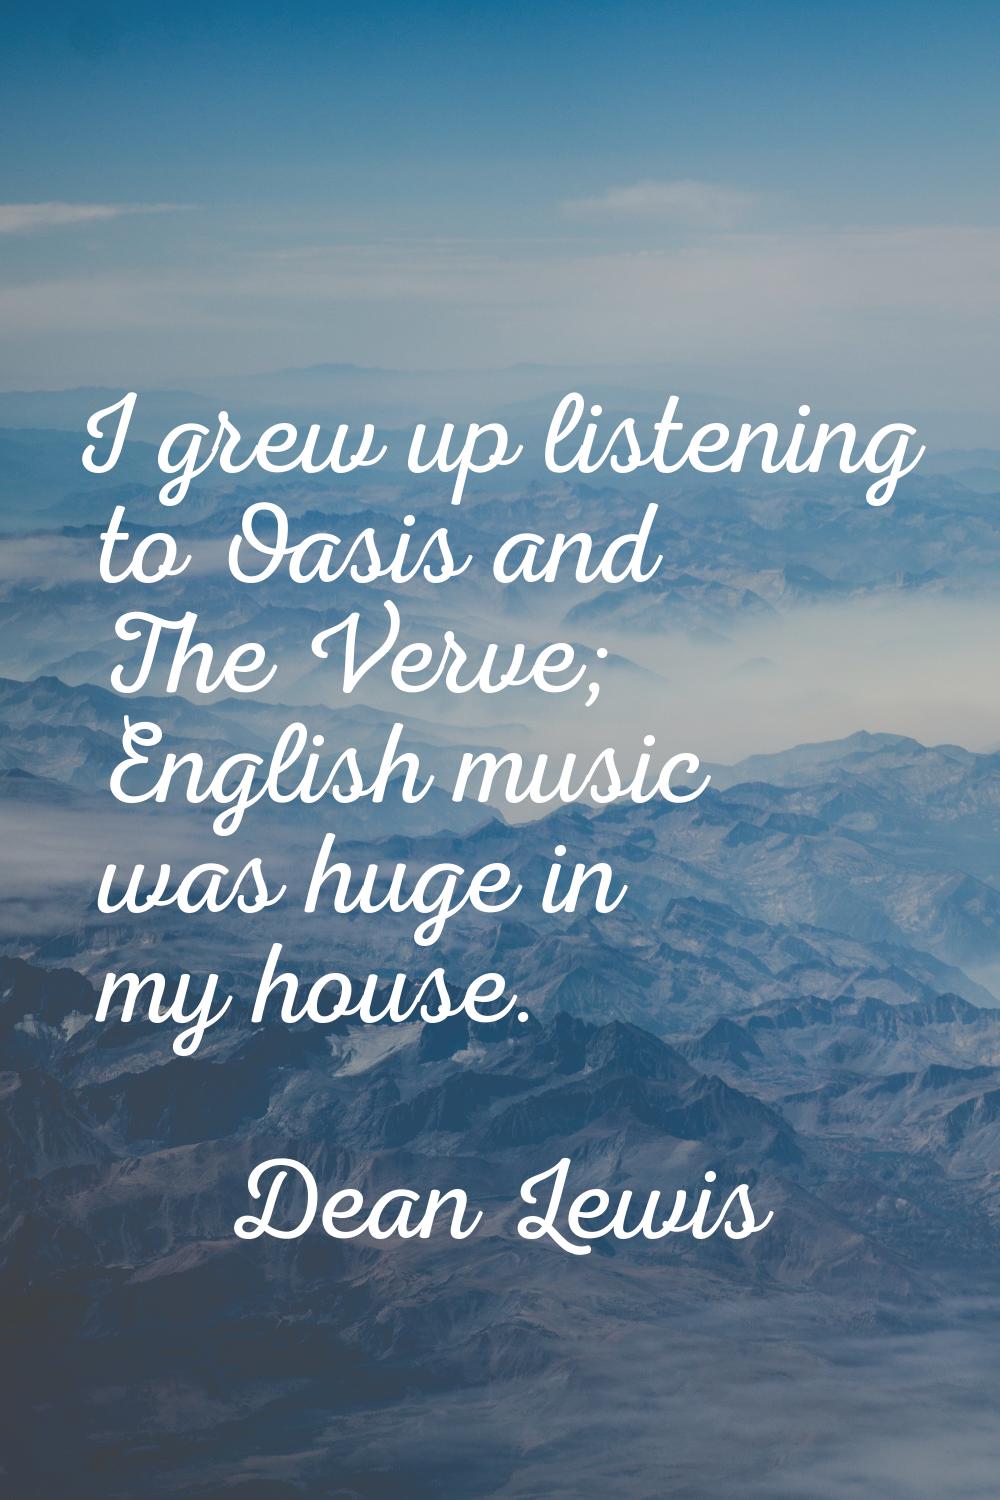 I grew up listening to Oasis and The Verve; English music was huge in my house.